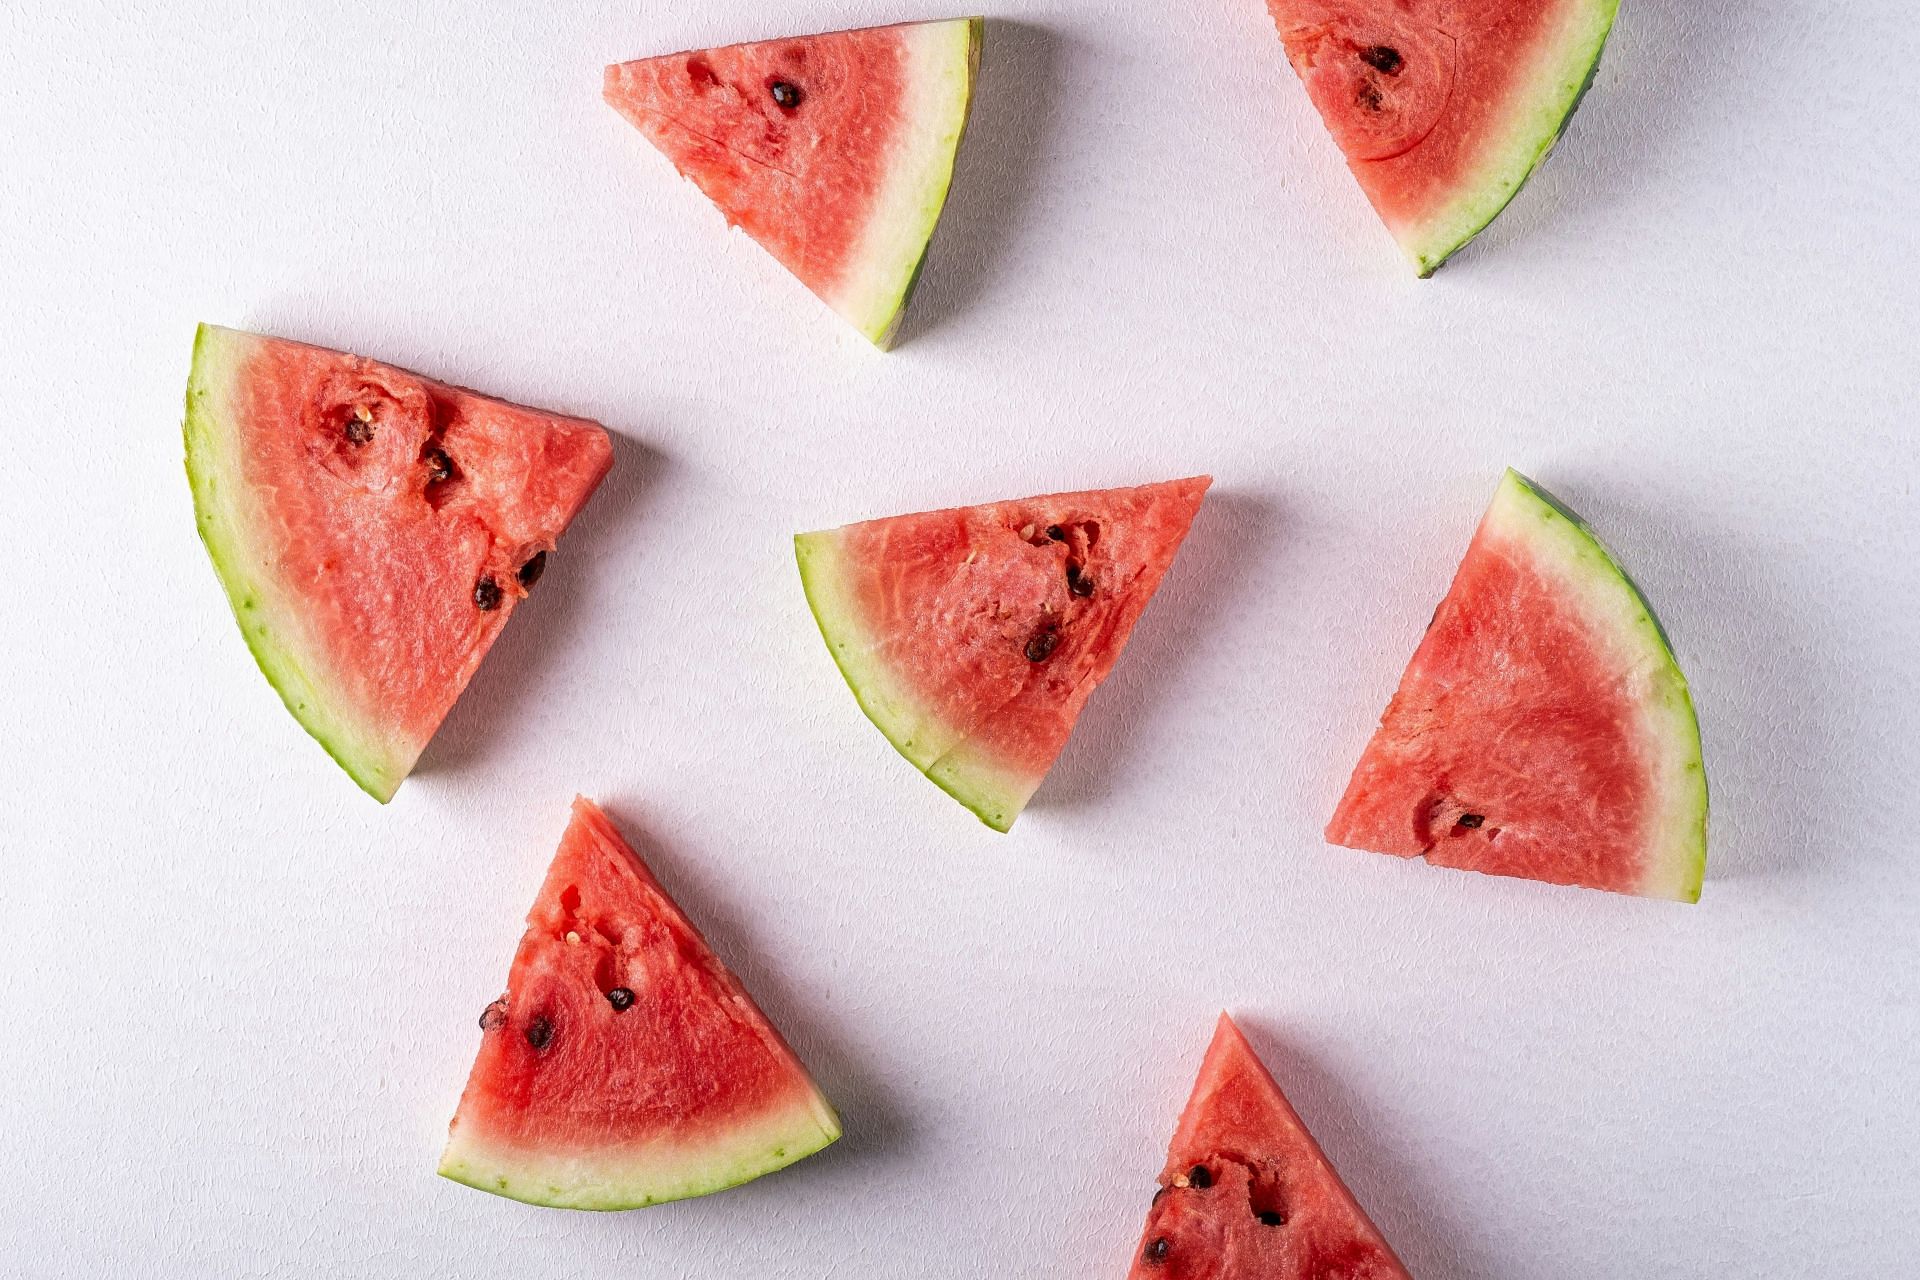 Watermelon is a good fruit to combat morning sickness (Image by Rodion Kutsaiev/Unsplash)